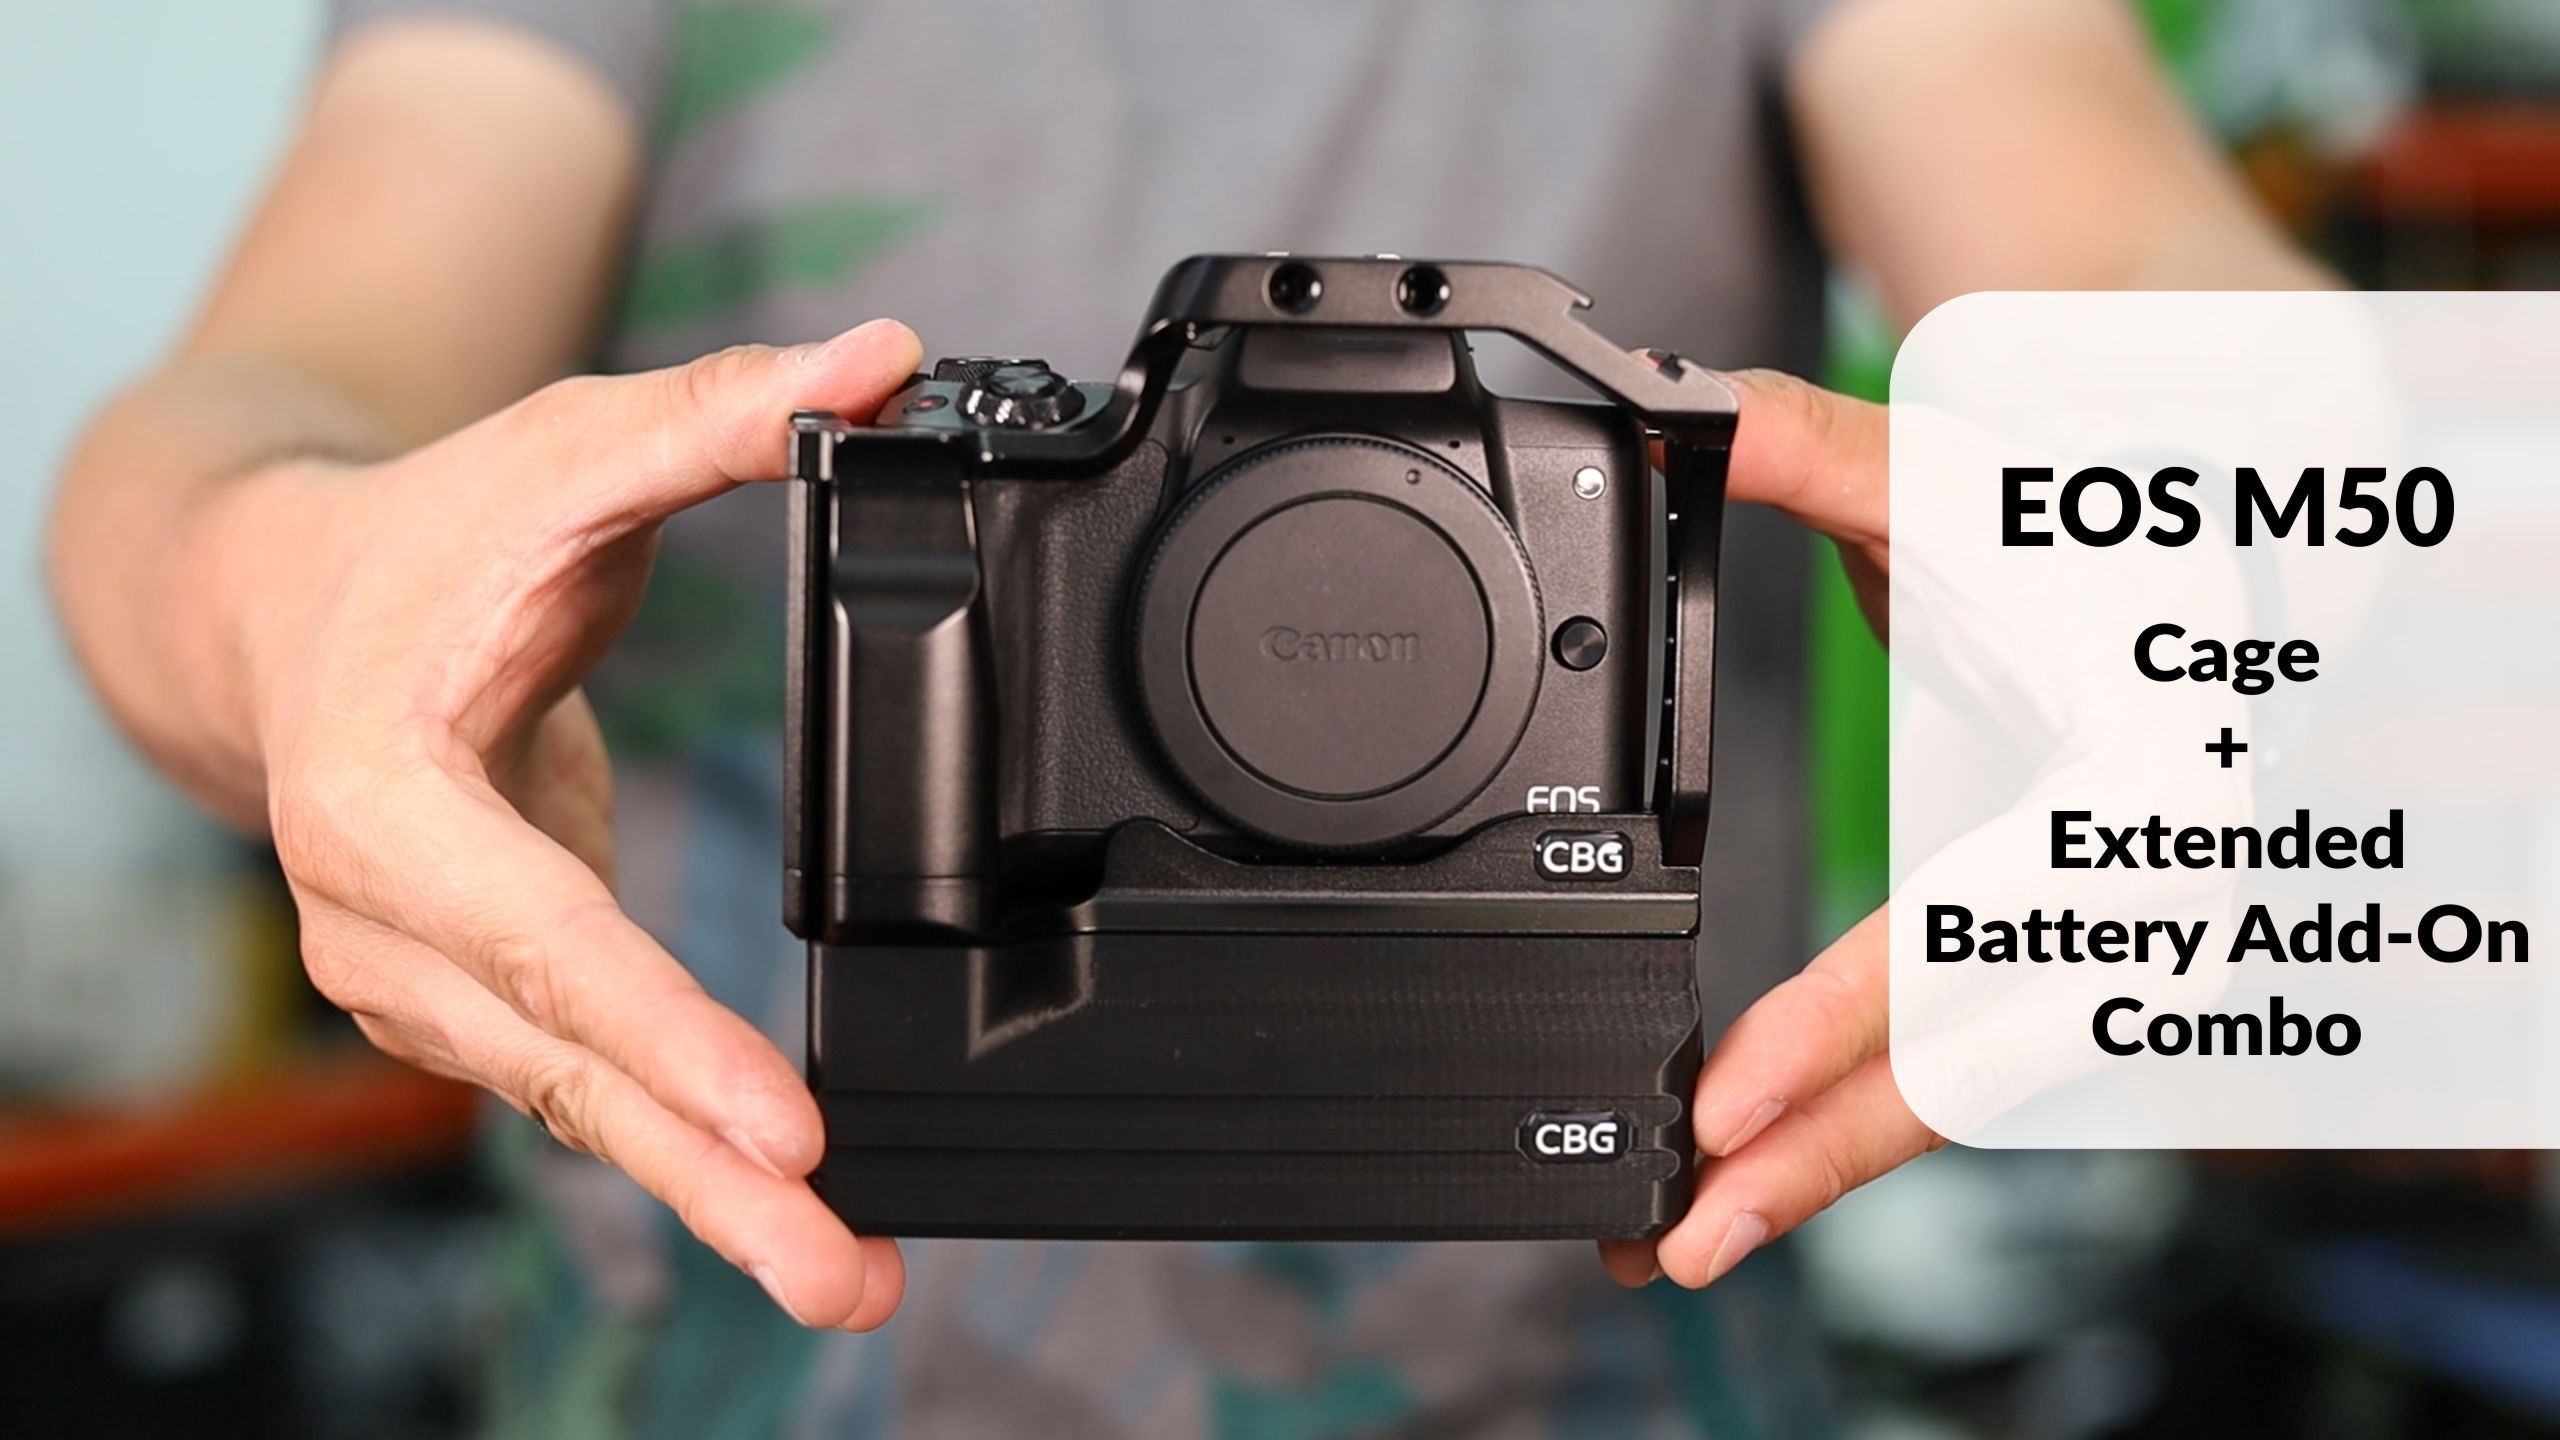 Battery Extension Add-On for Canon EOS M50 Cage